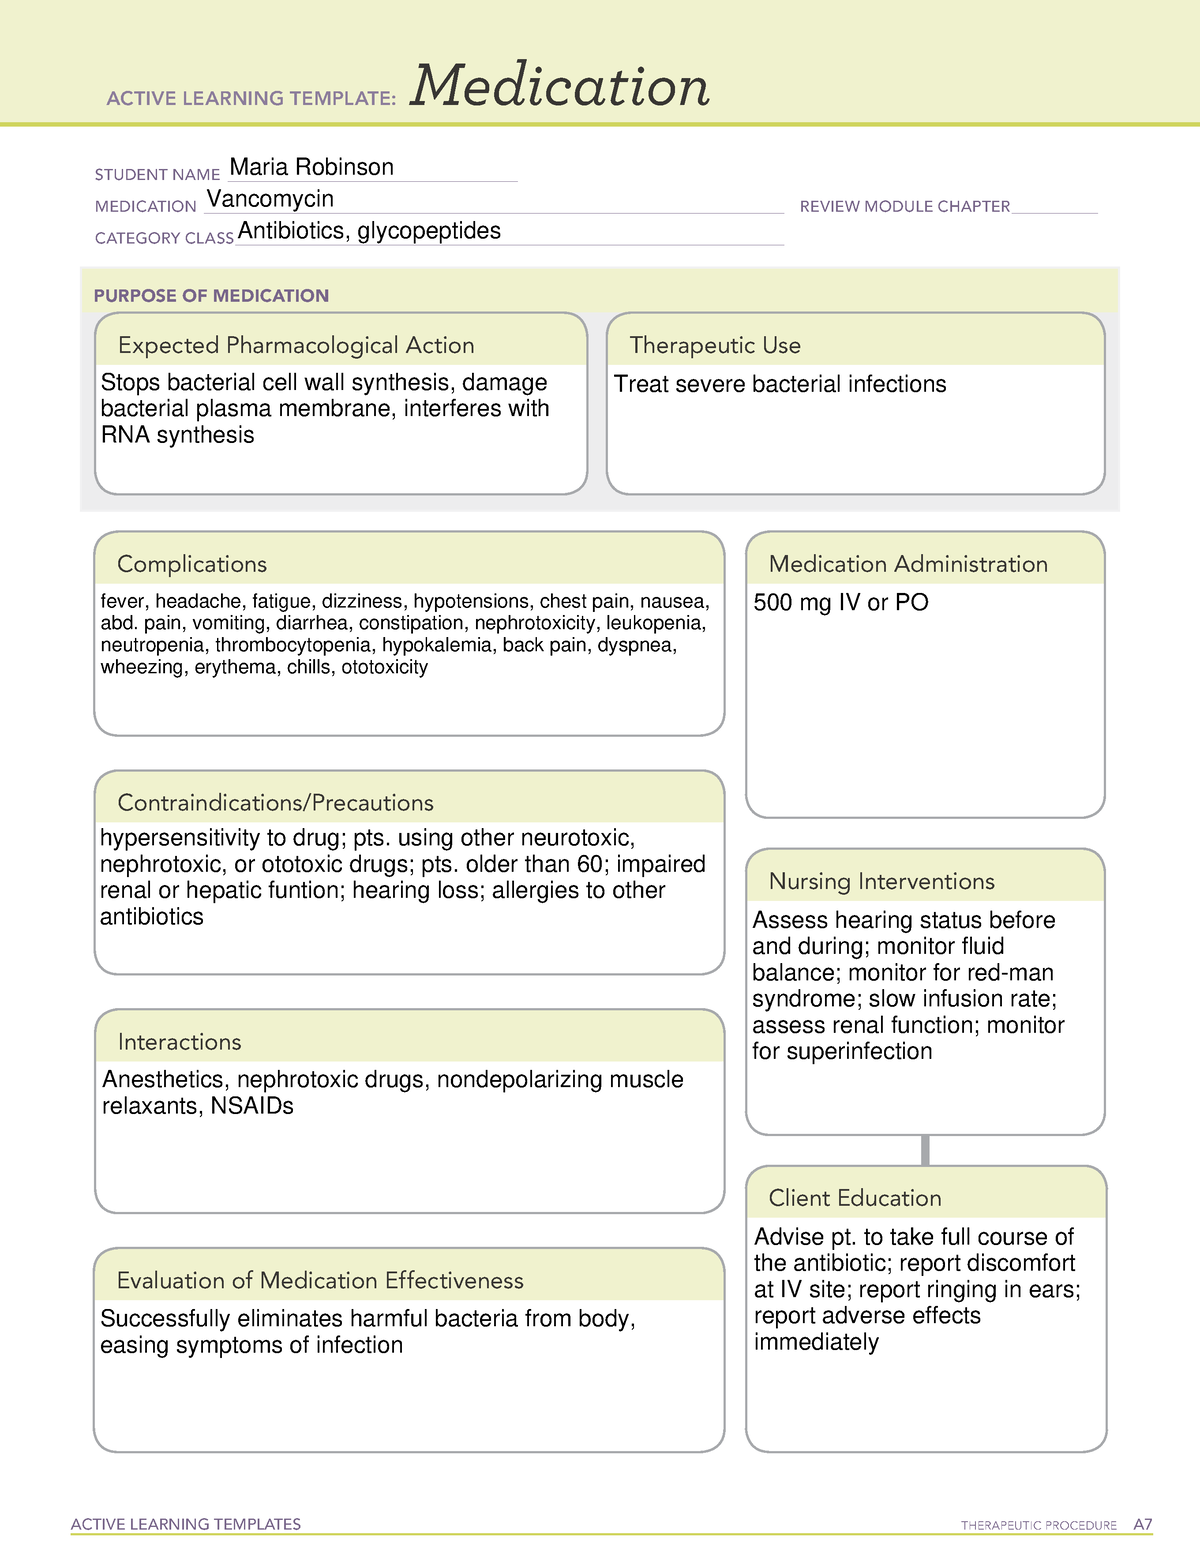 med card ACTIVE LEARNING TEMPLATES THERAPEUTIC PROCEDURE A